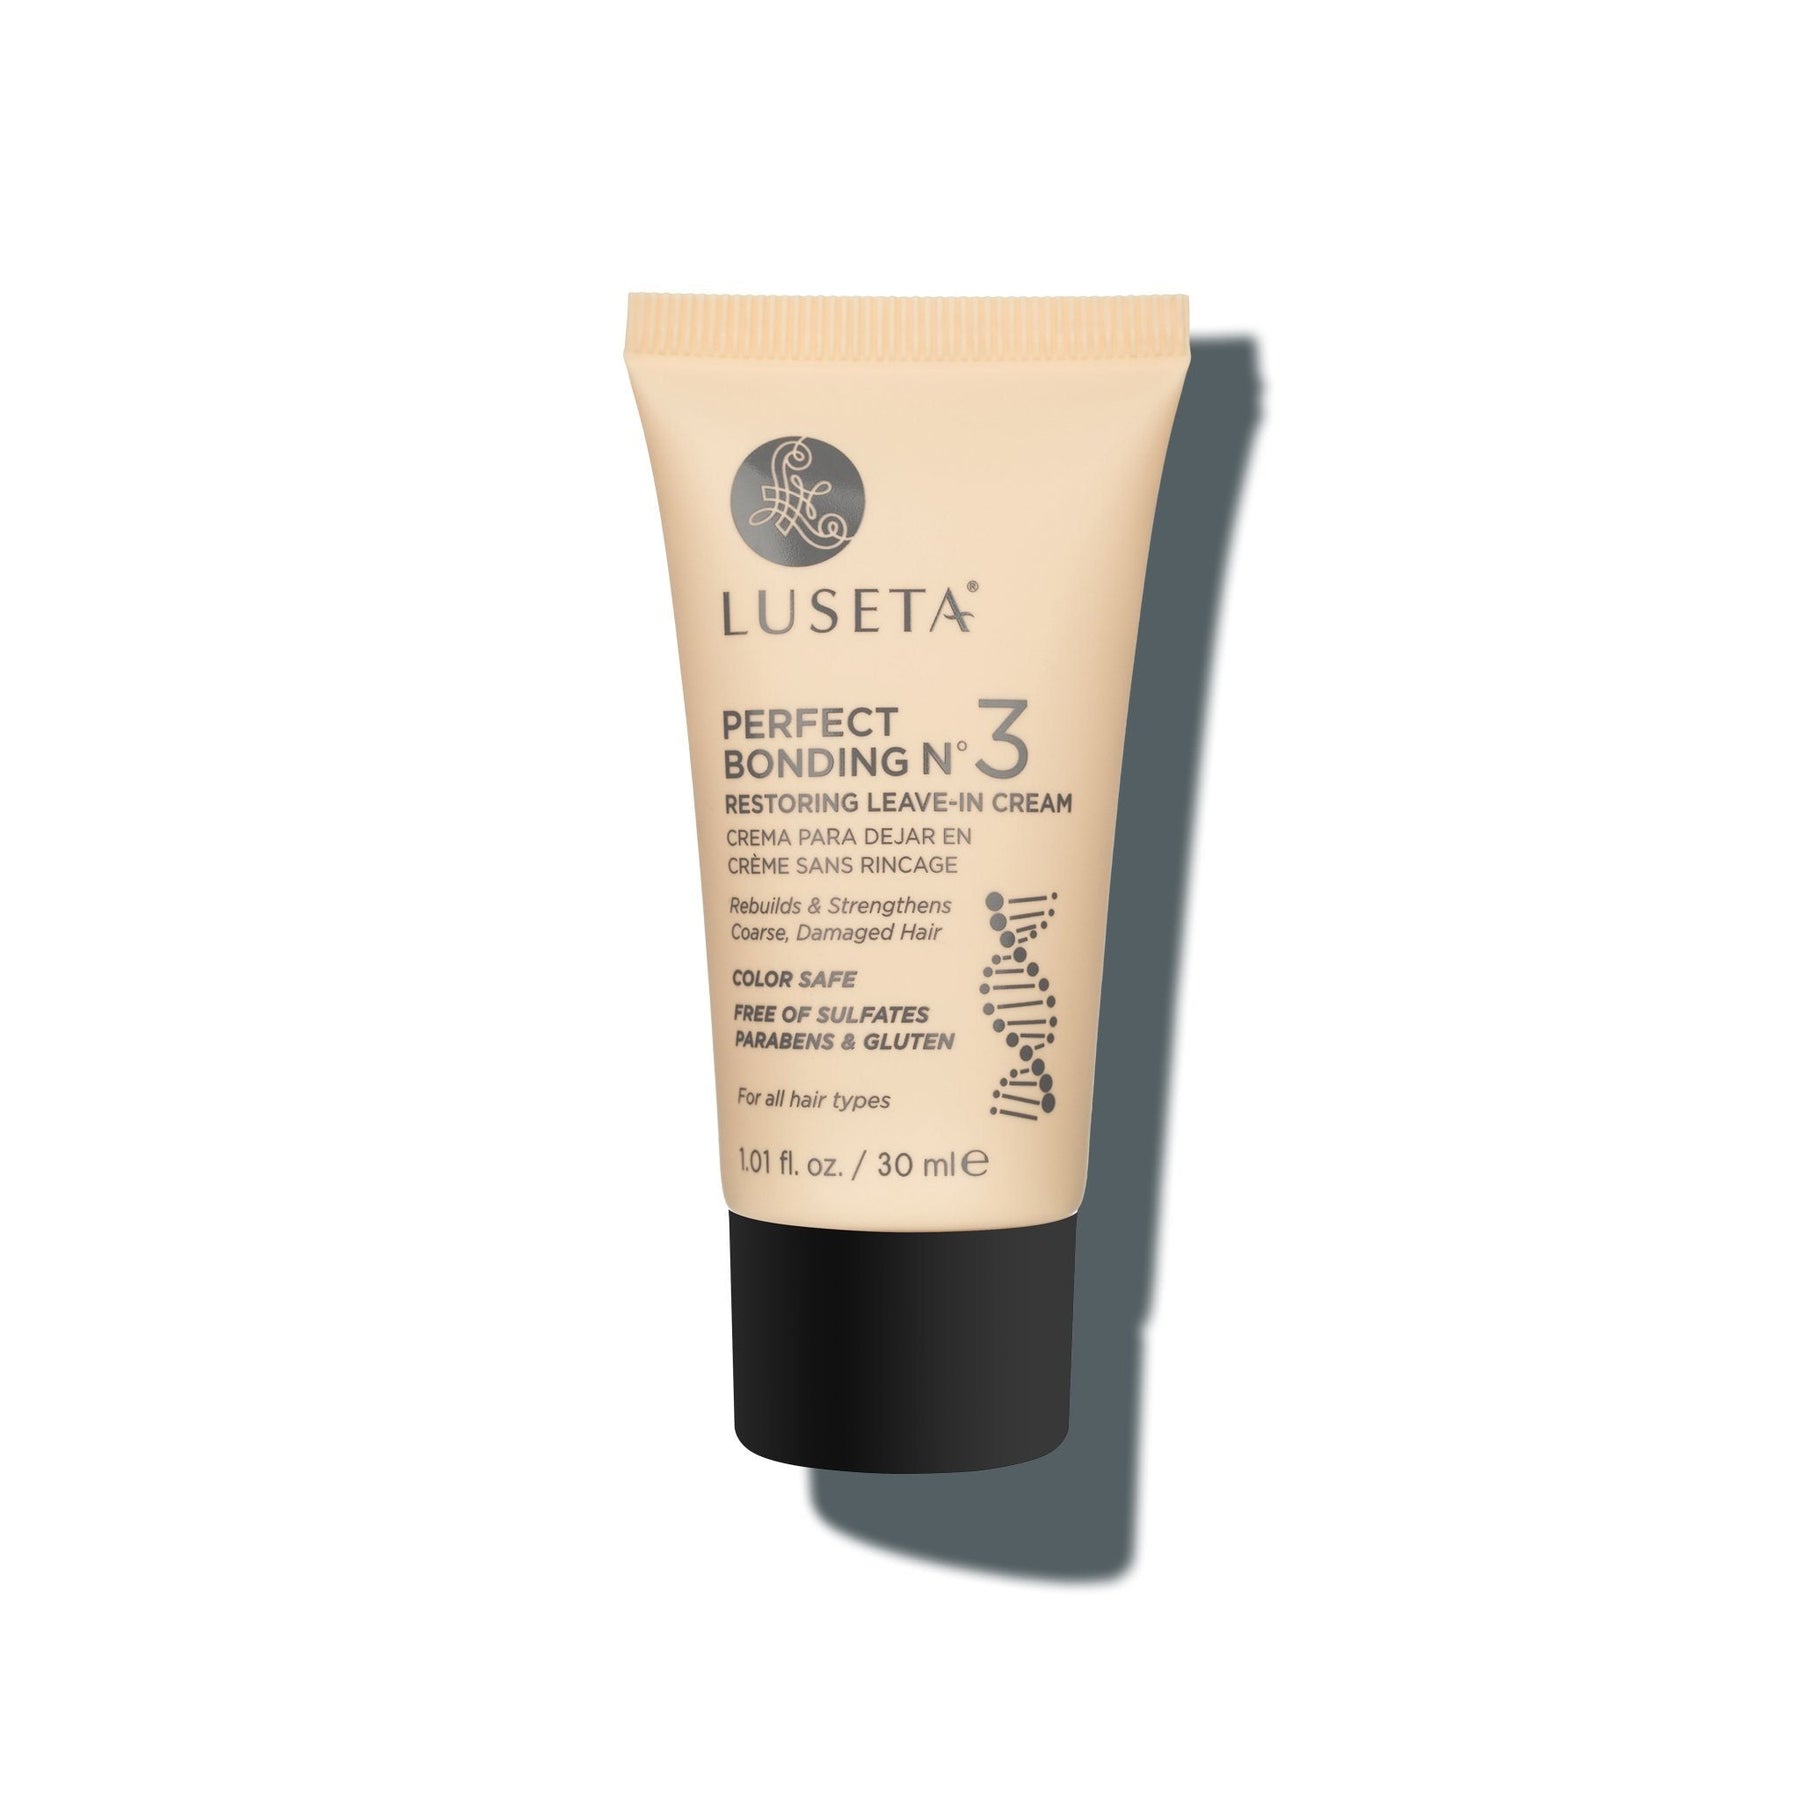 Perfect Bonding No.3 Restoring Leave-in Cream - 1.01oz - by Luseta Beauty |ProCare Outlet|